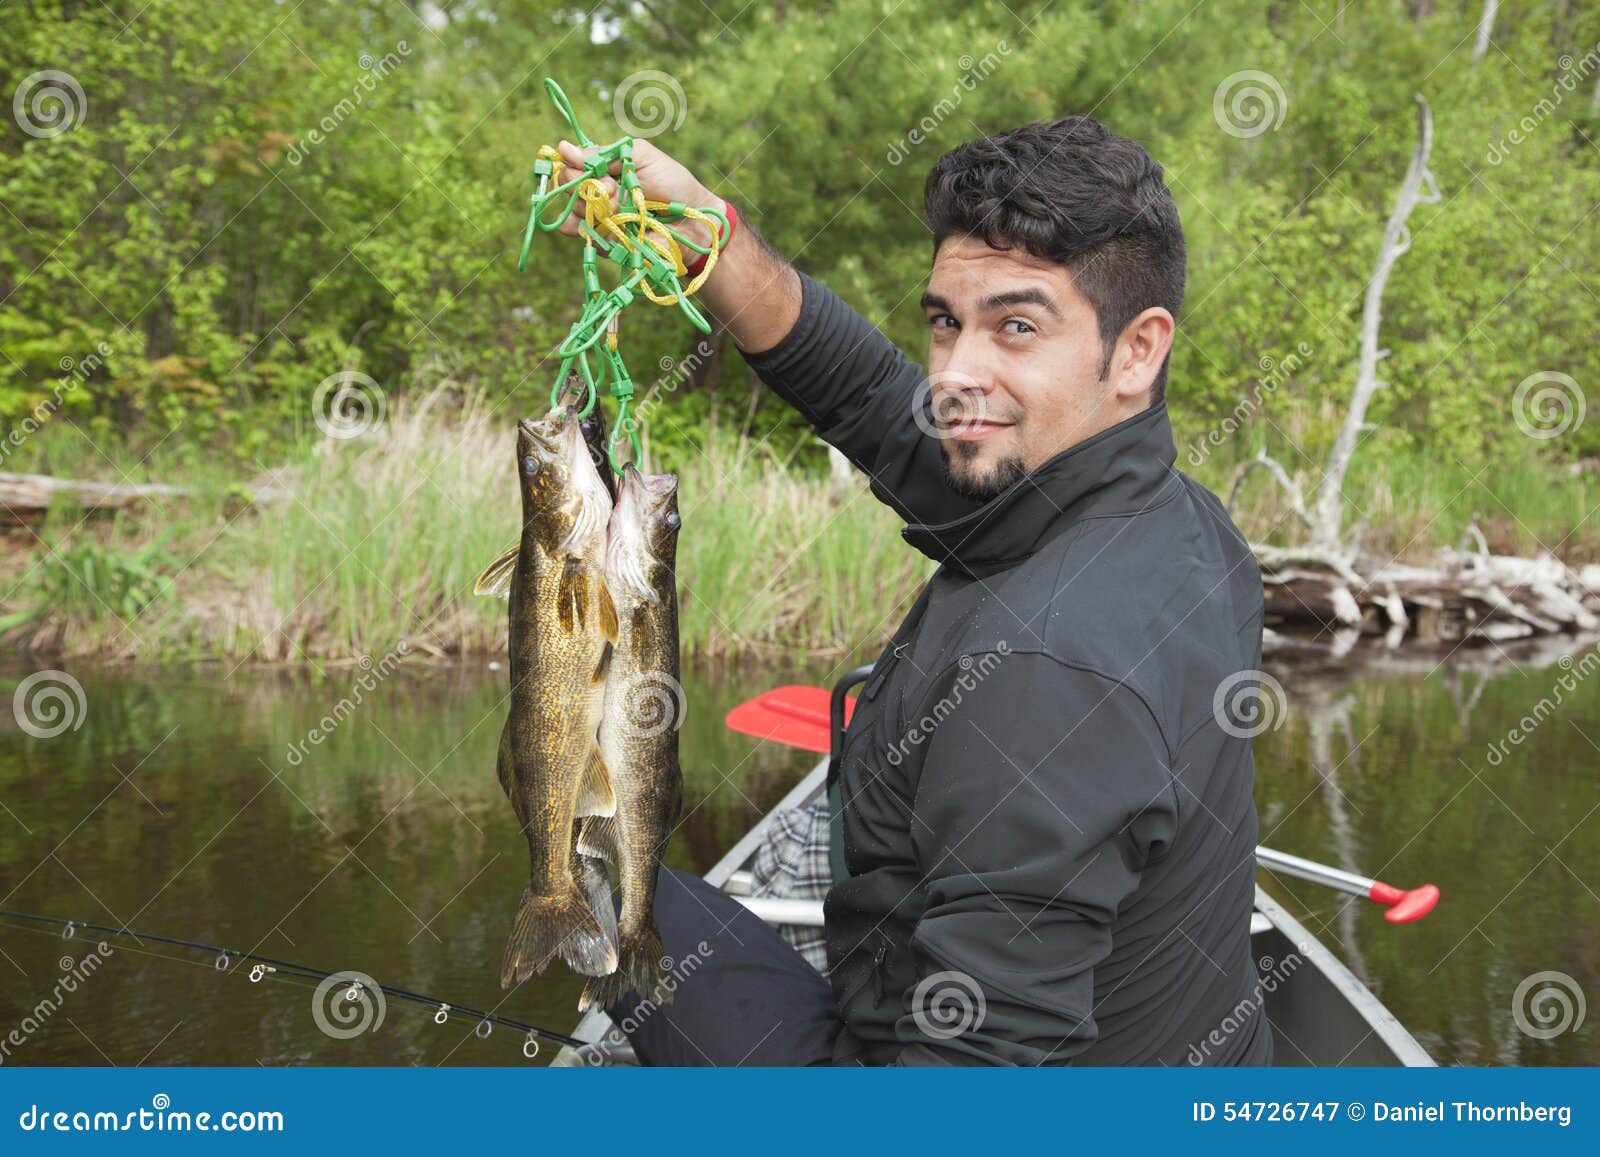 167 Fish Stringer Stock Photos - Free & Royalty-Free Stock Photos from  Dreamstime